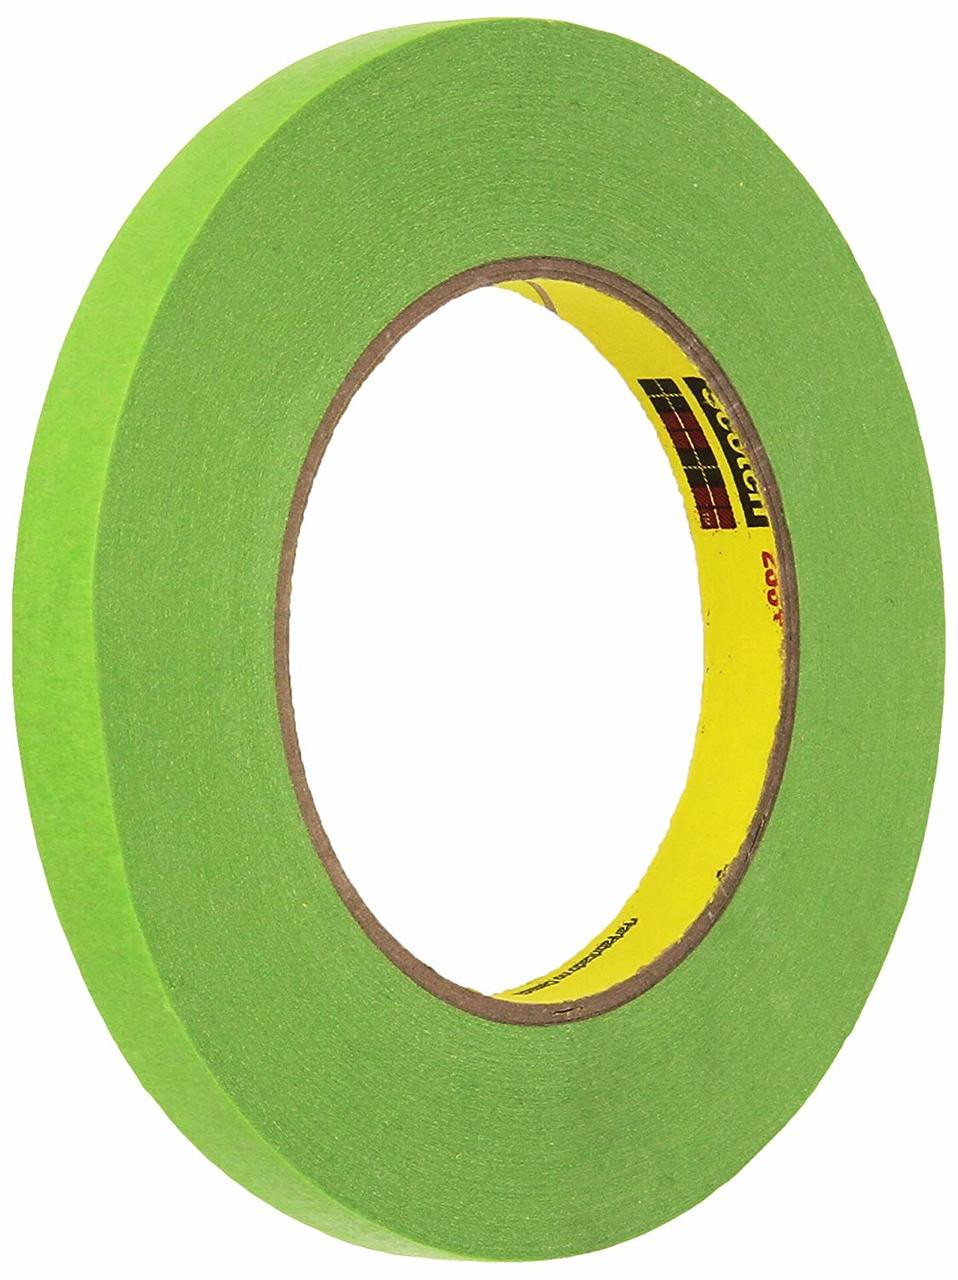 Scotch Performance Masking Tape 233+ 26332, Moisture Resistant, Flexible,  Green Color, 12 mm x 55 m​​, 12/Pack